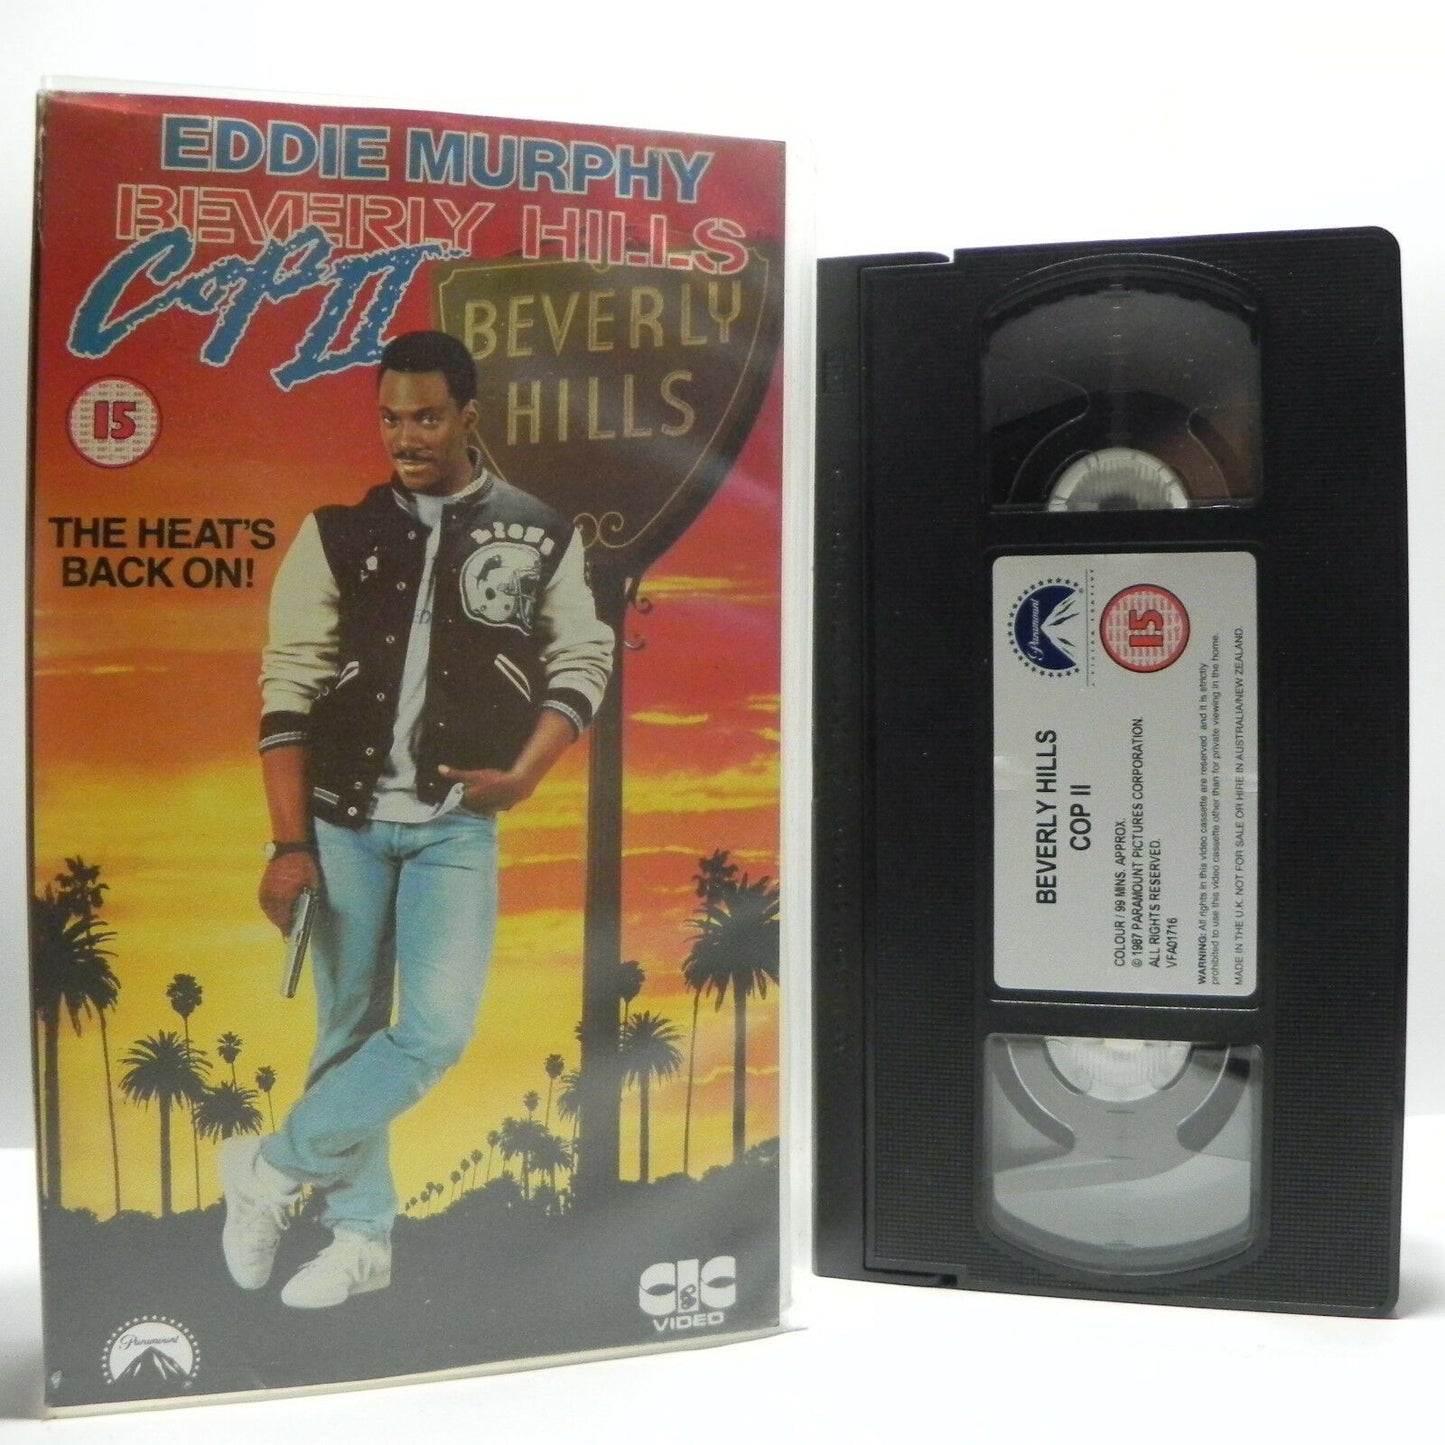 Beverly Hills Cop 2 - Paramount - Comedy - Classic Action - Eddie Murphy - VHS-